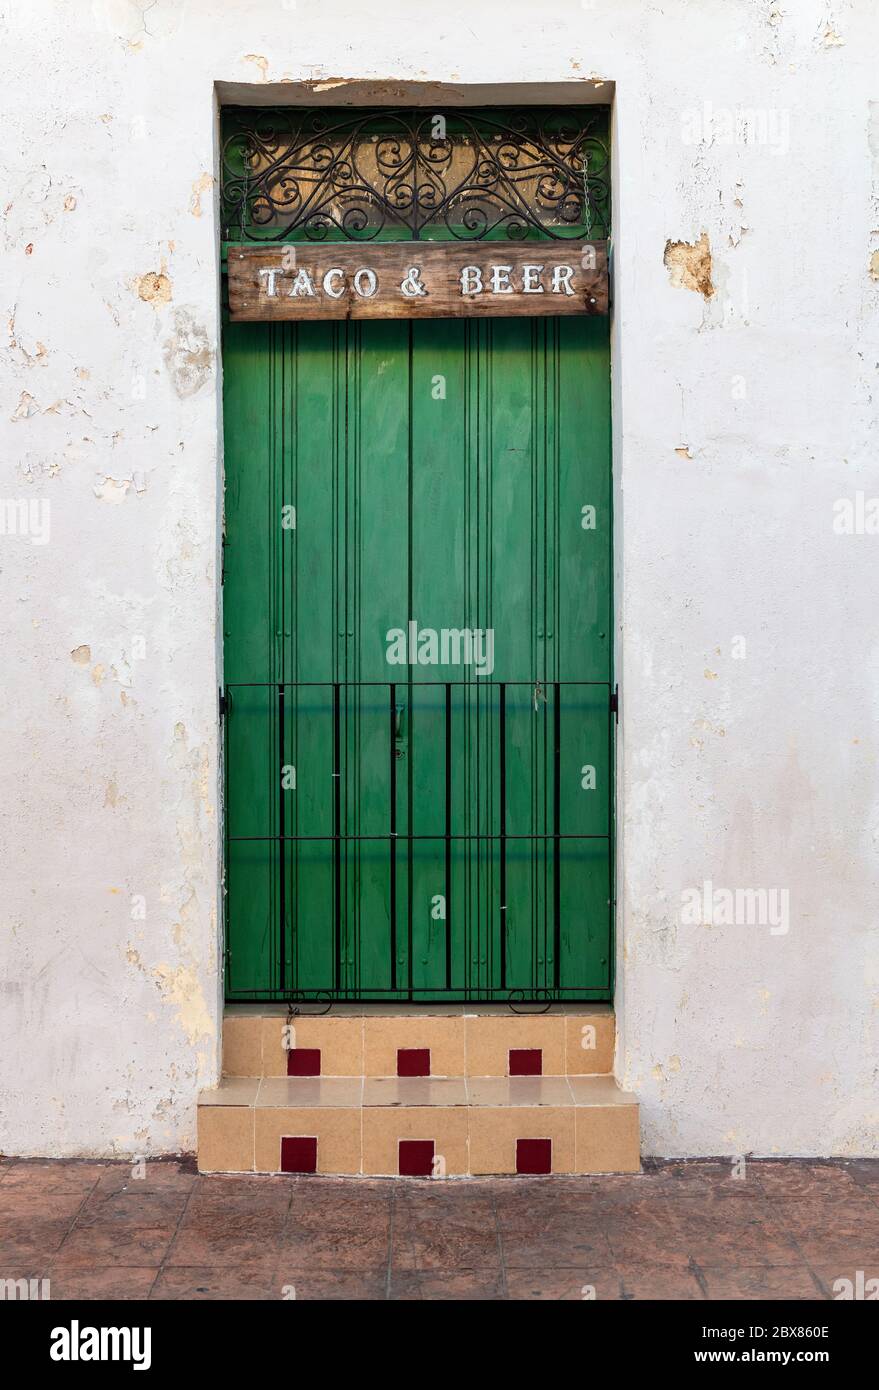 White colonial style facade with green metallic door and a 'Taco and Beer' sign, Campeche, Mexico. Stock Photo